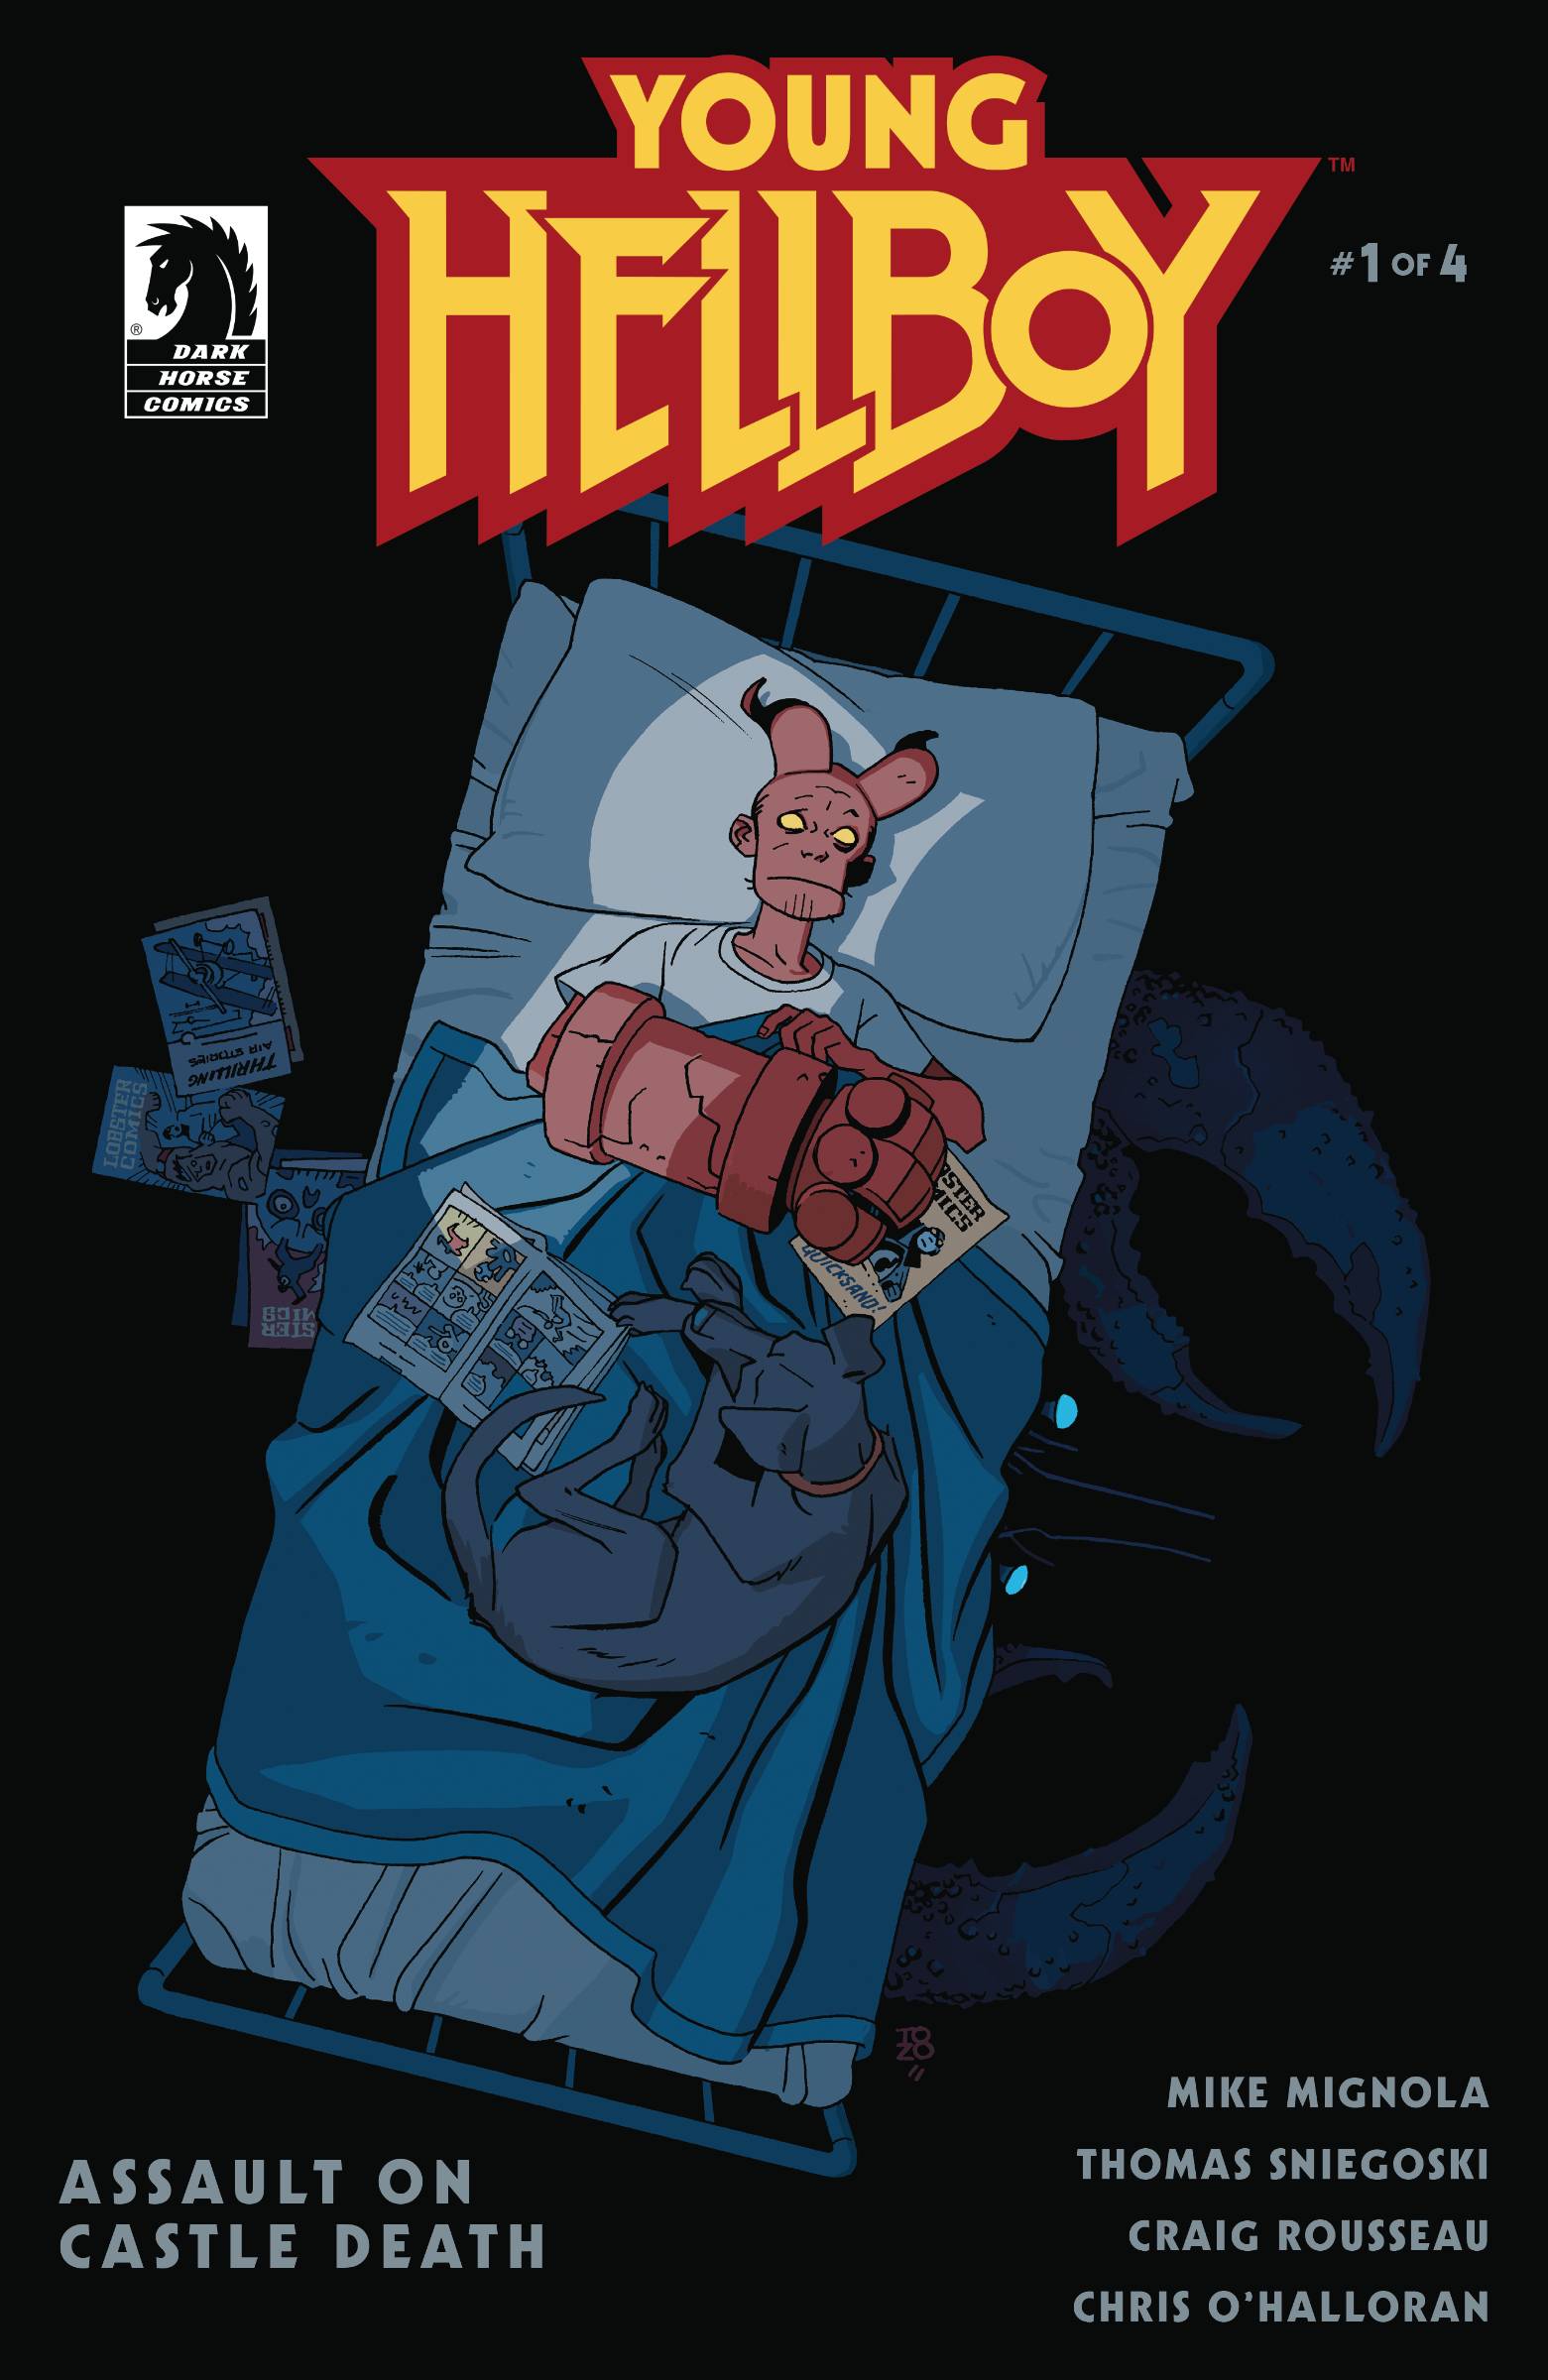 YOUNG HELLBOY ASSAULT ON CASTLE DEATH